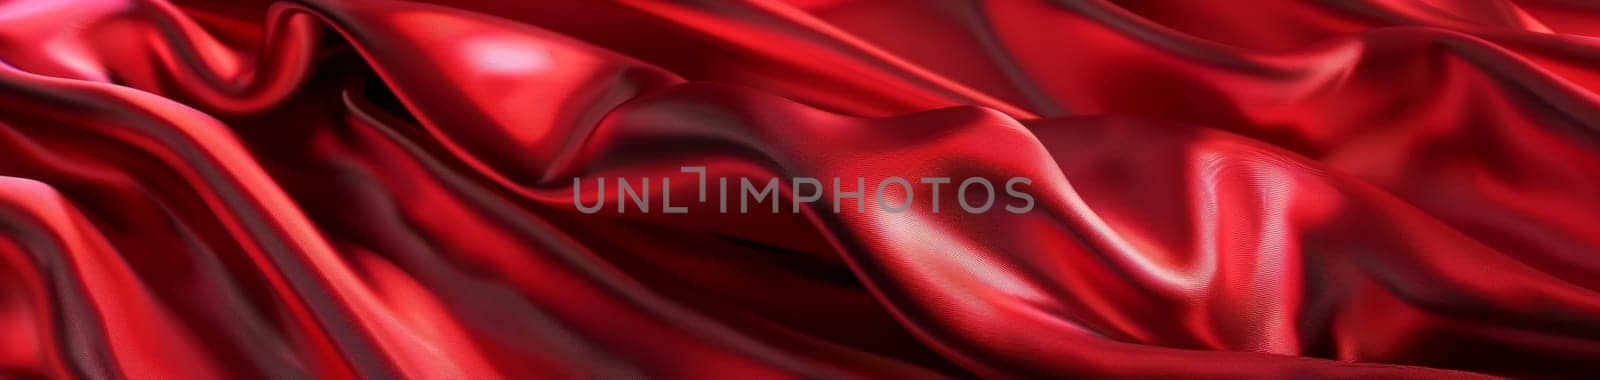 A stunning visual of lustrous red satin drapery, capturing the essence of luxury with its vibrant color and smooth texture